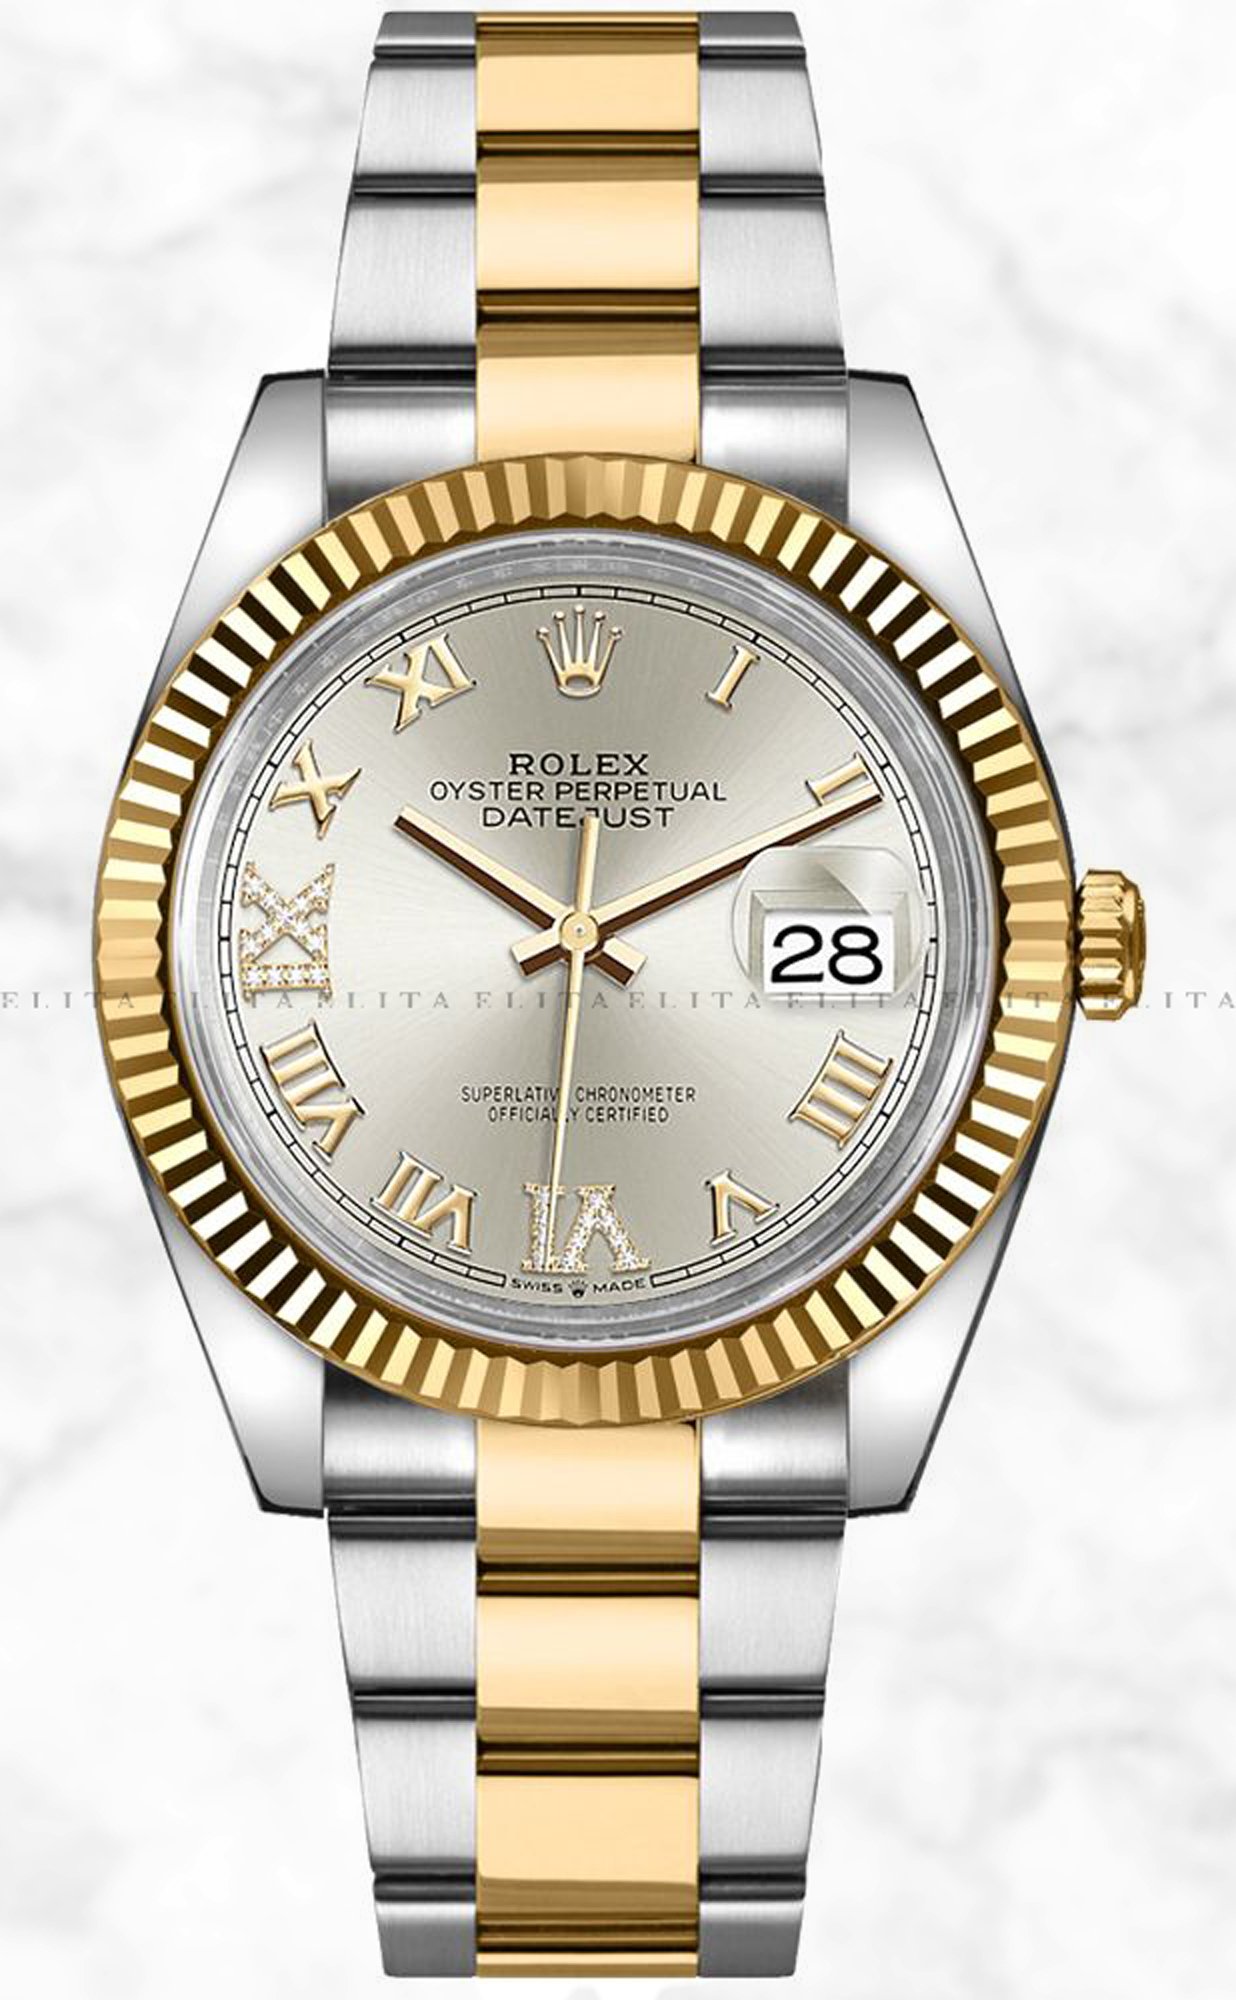 rolex oyster perpetual datejust roman numerals price